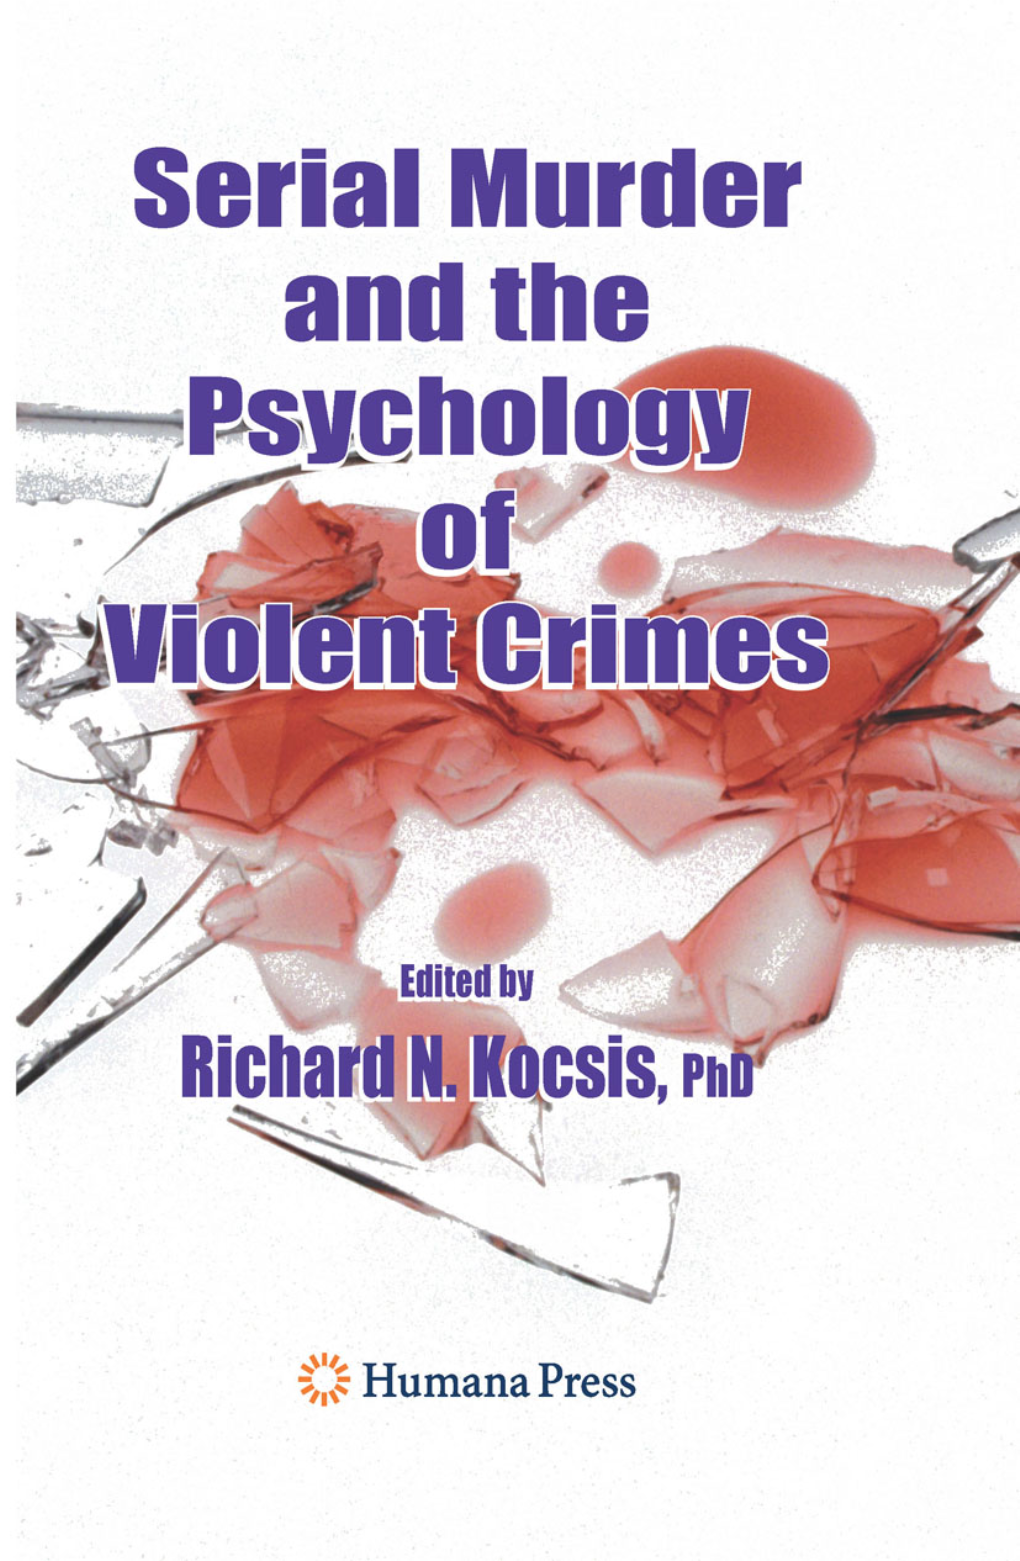 CHAPTER 1 Normalcy in Behavioral Characteristics of the Sadistic Serial Killer